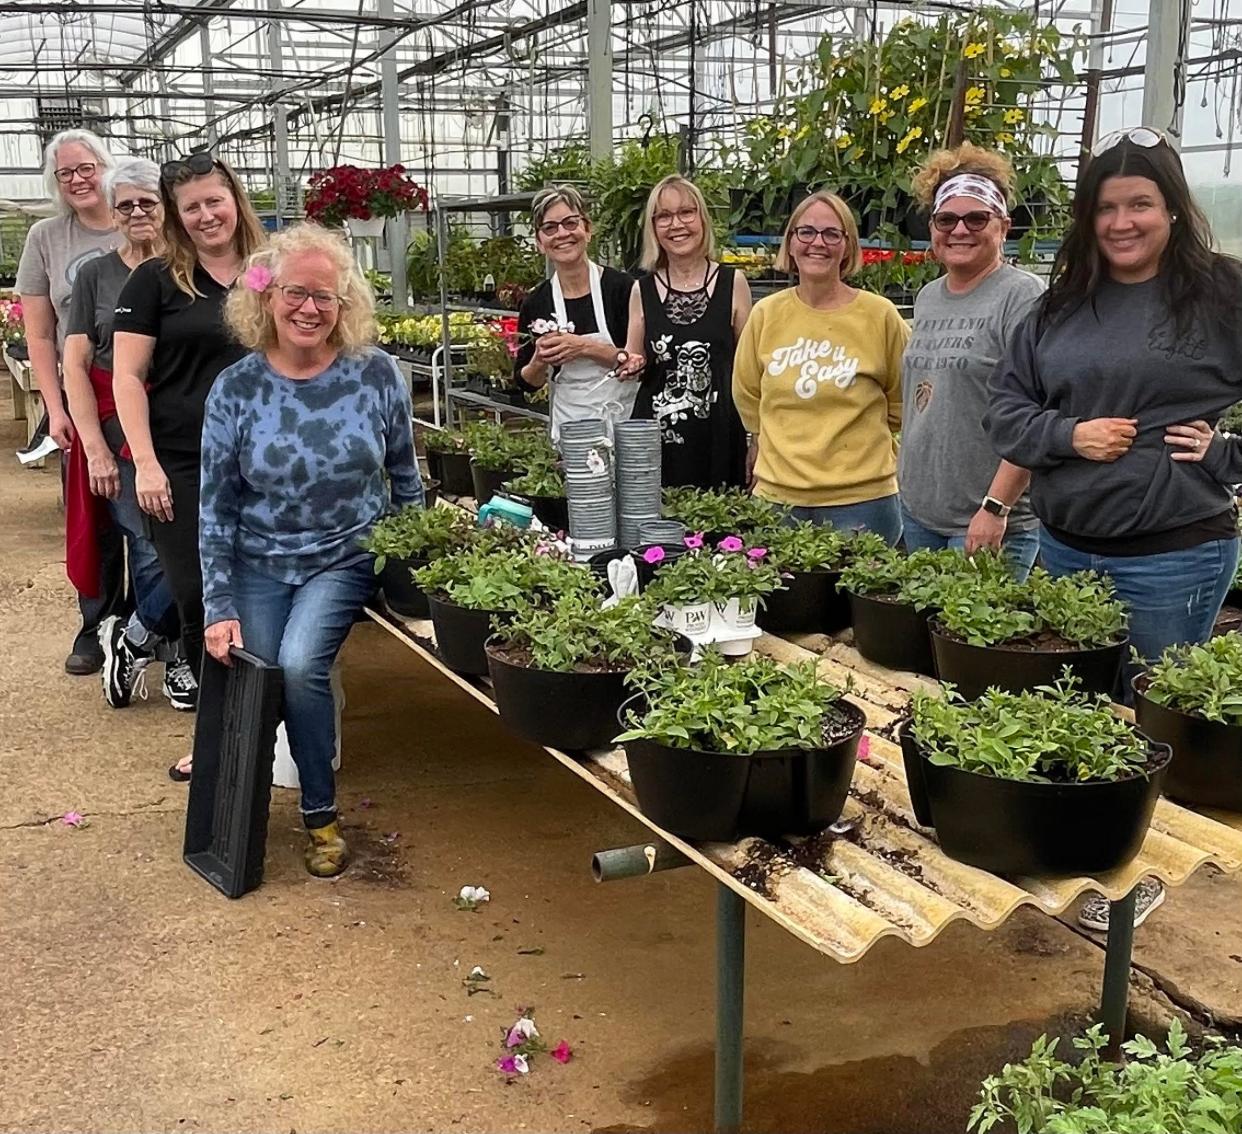 Those involved in the Newcomerstown Now hanging baskets project are ‒ Left front to back: 
Brenda Junkin, master gardener, Heather Mann, AnneMarie Maddox and Carrie Kunkle; Right front to back: Jessica Moore, Lisa Spillman, Jen LaVigne, Susie Hart and Nancy Orr.